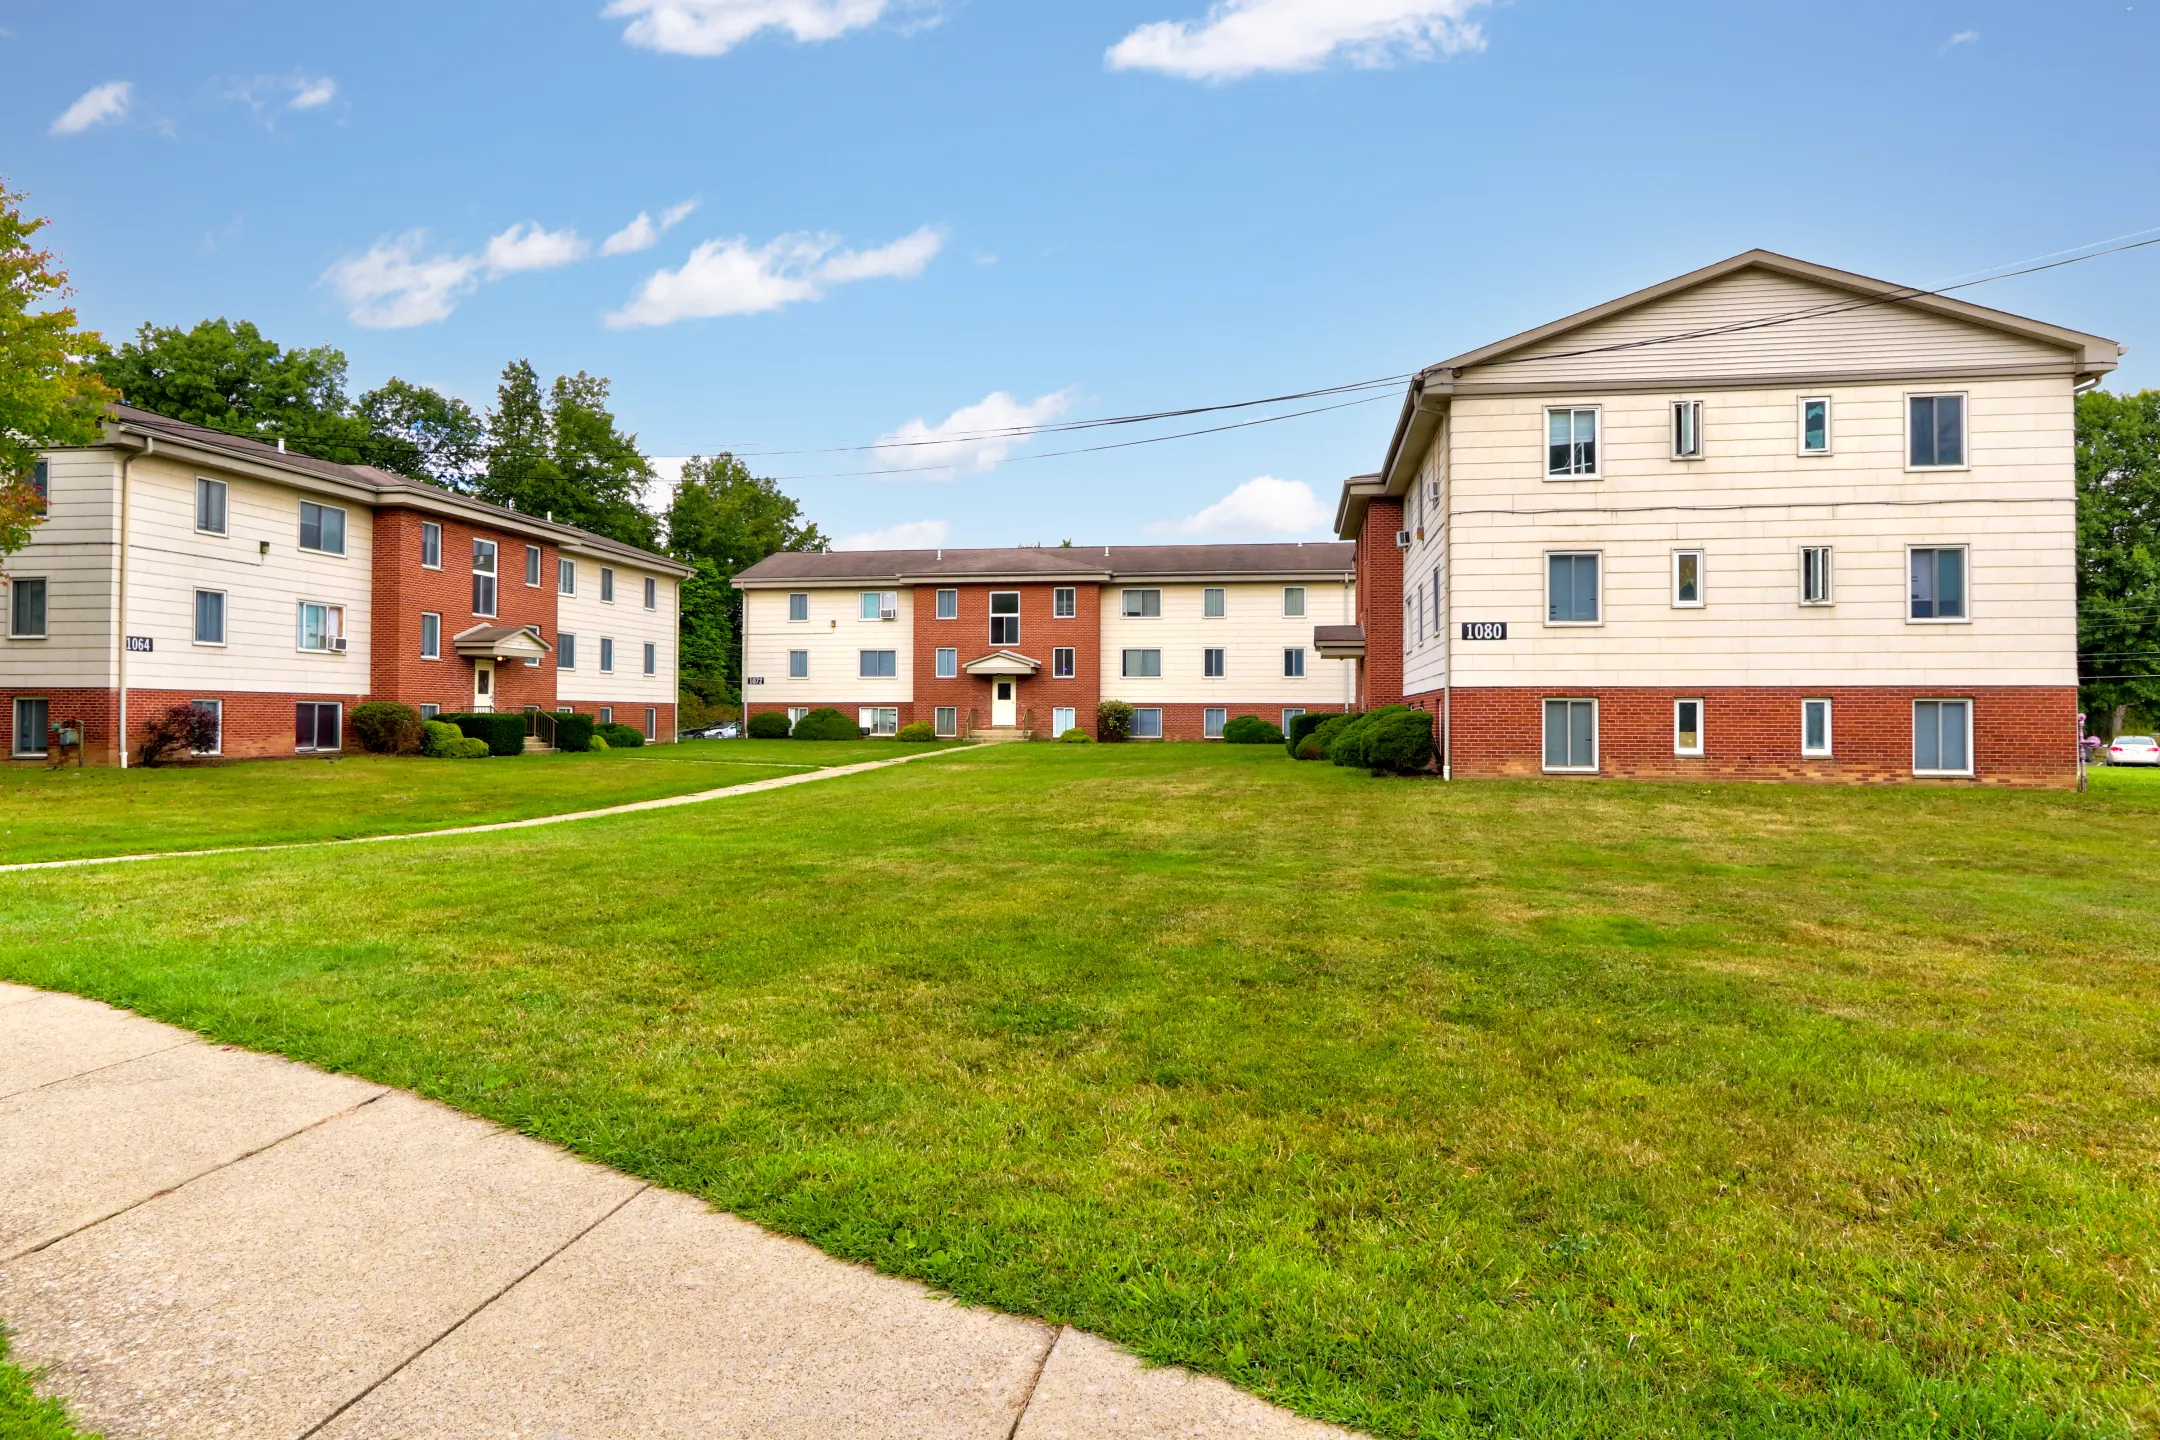 Building - Seneca Oaks Apartments - Youngstown, OH